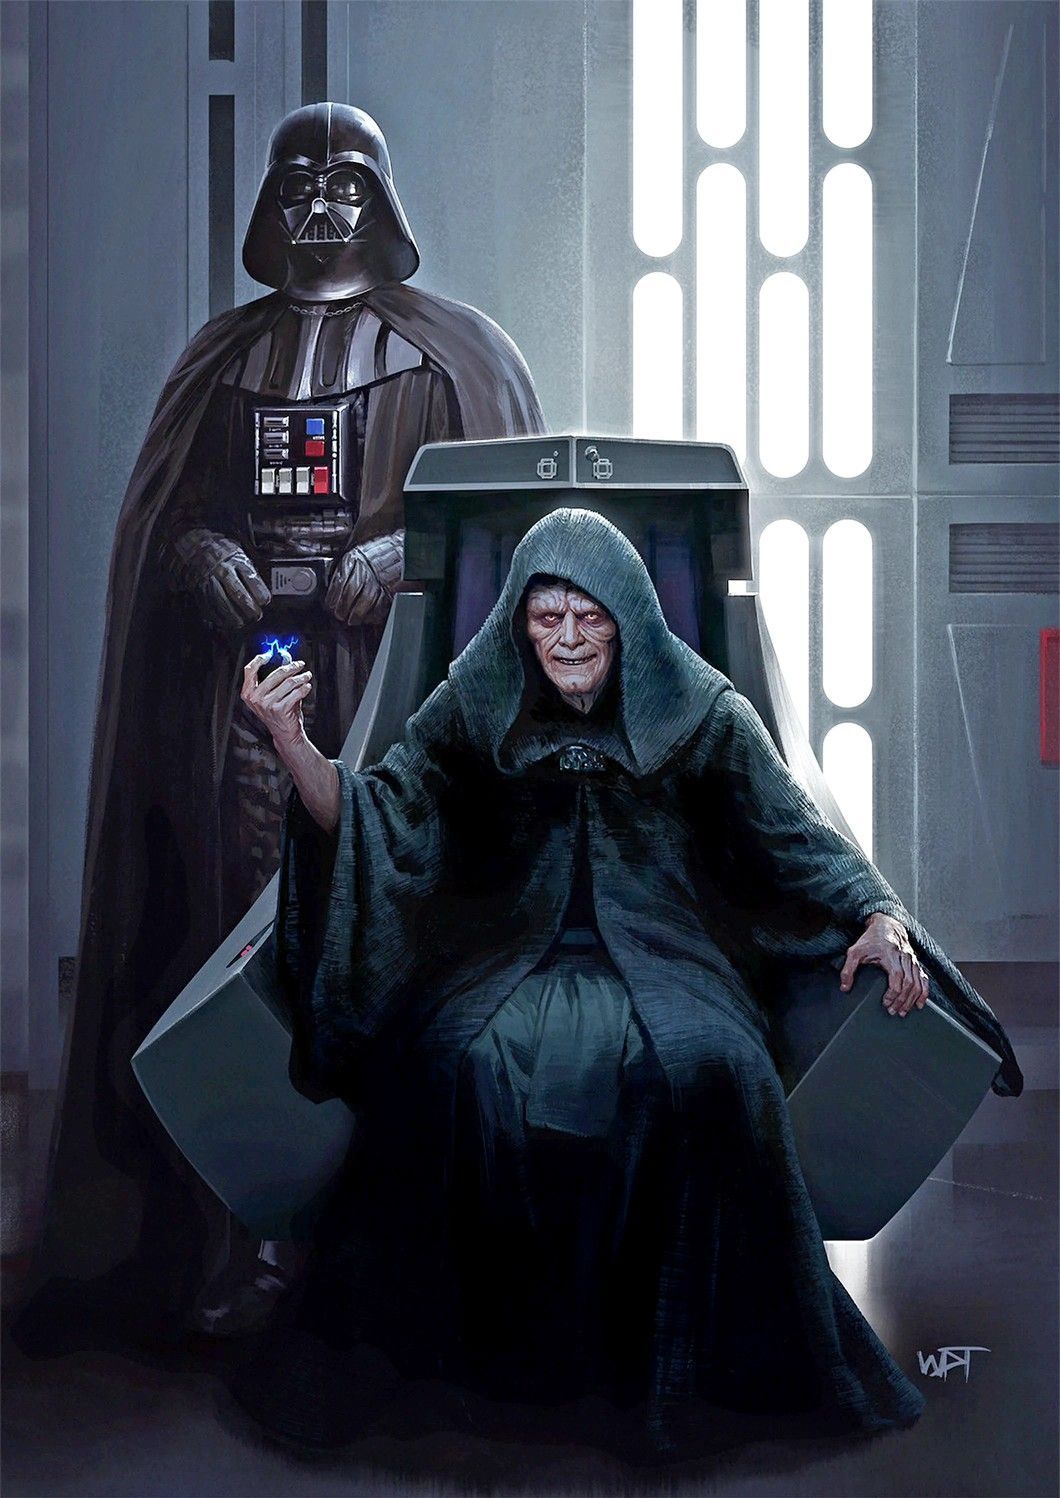 Lord Vader and Lord Palpatine. Star wars picture, Star wars